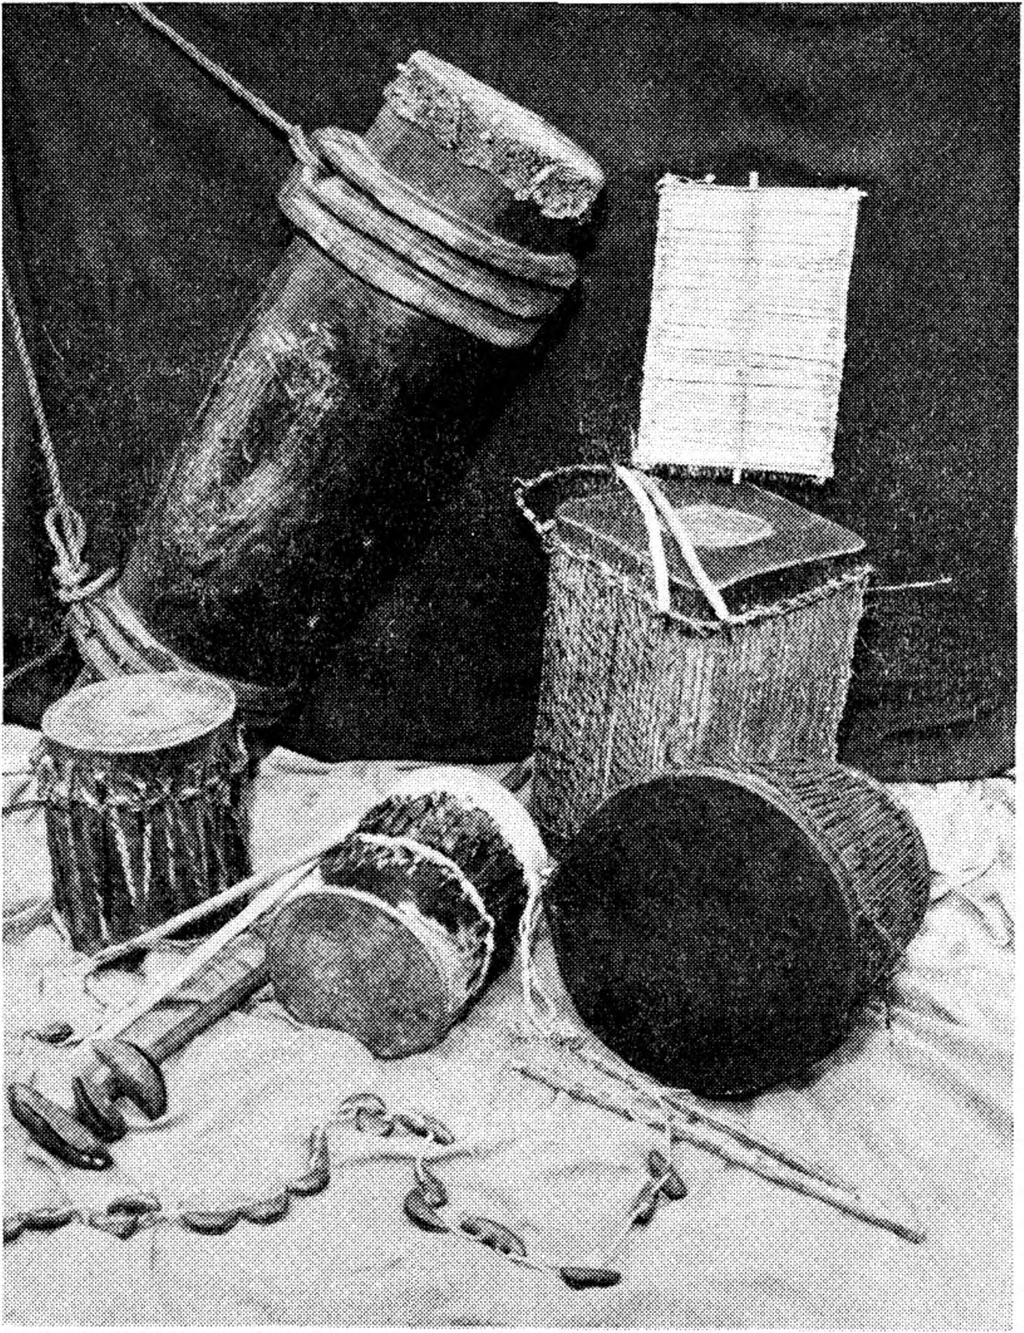 Length 10 inches, diameter 71 inches. (Mid Right) ATENESU DRUM. Made from 4 gall, tin covered with ox hide top and bottom. Teso tribe (Elgon Nyanza District of Kenya). (Lower Right) ATENESU DRUM.